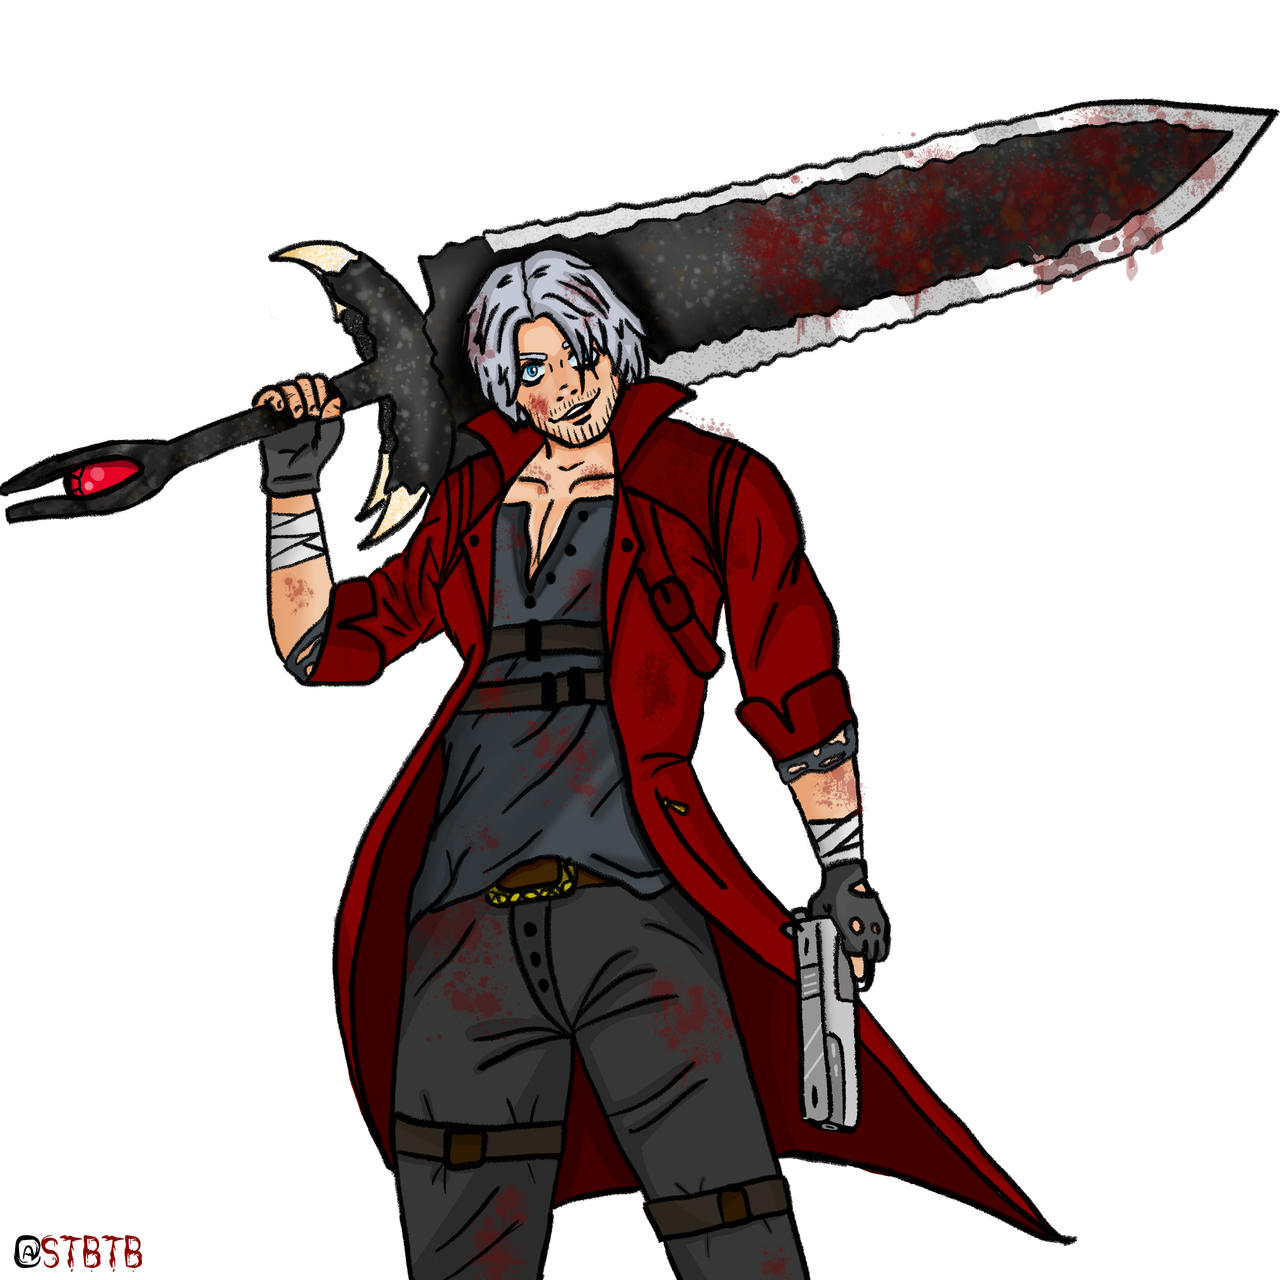 Dante from DmC: Devil May Cry by Saltycat20 on DeviantArt